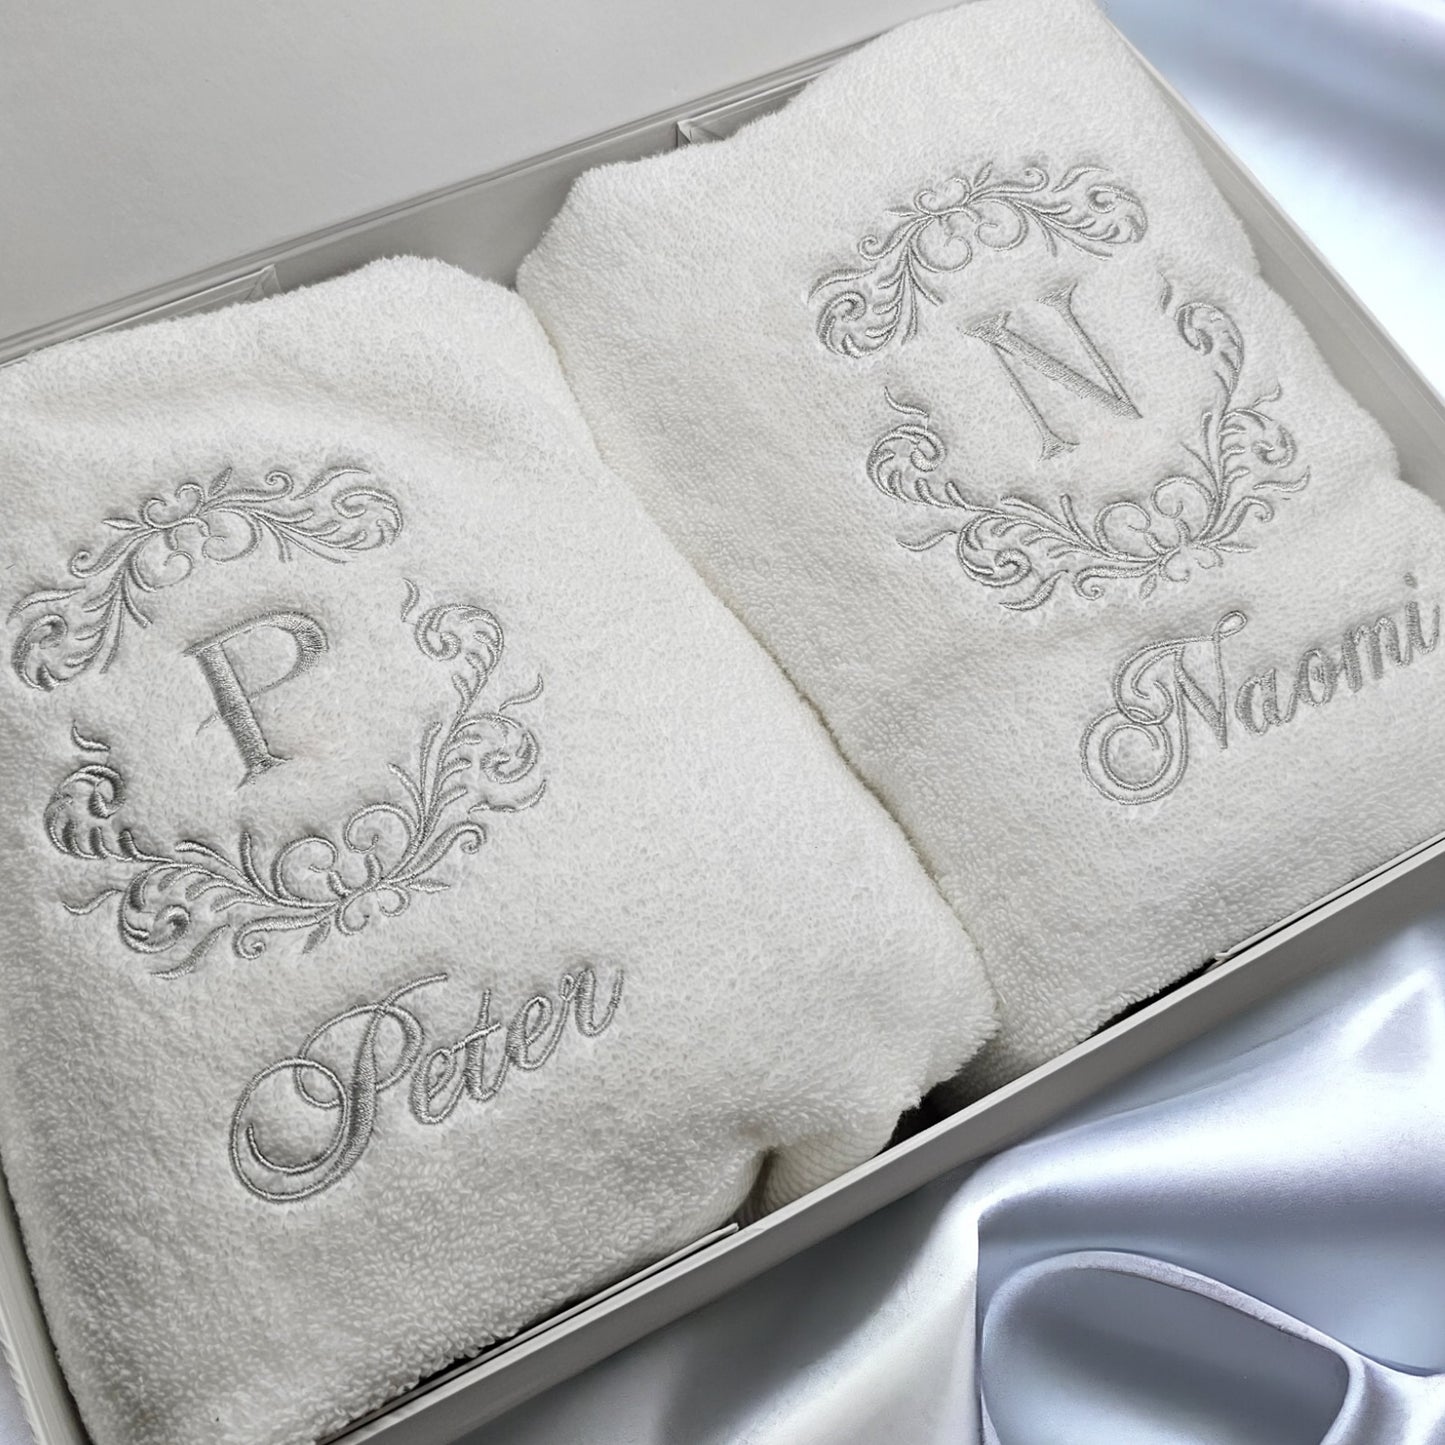 Wedding Towel Set Personalised with embroidery bath towels